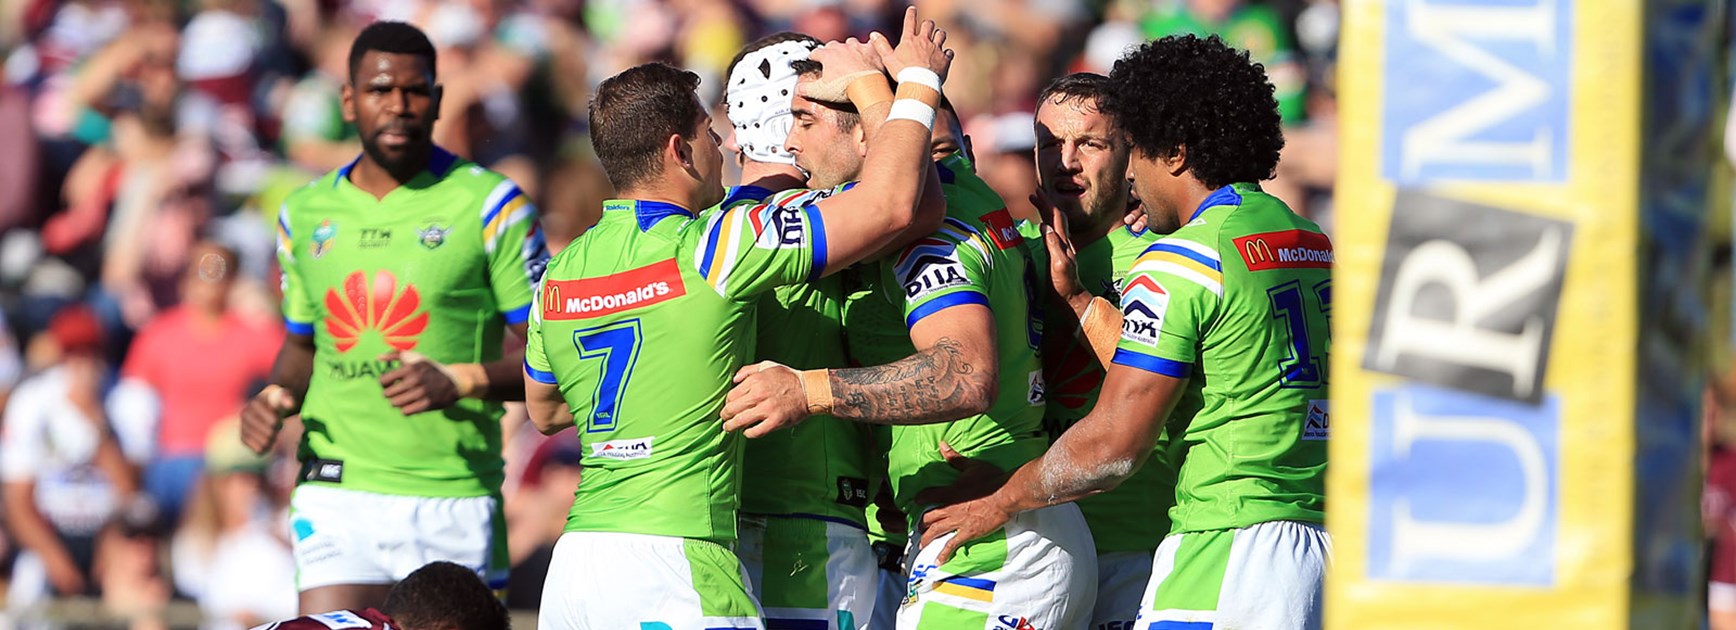 Raiders players celebrate during their win over the Sea Eagles in Round 25.